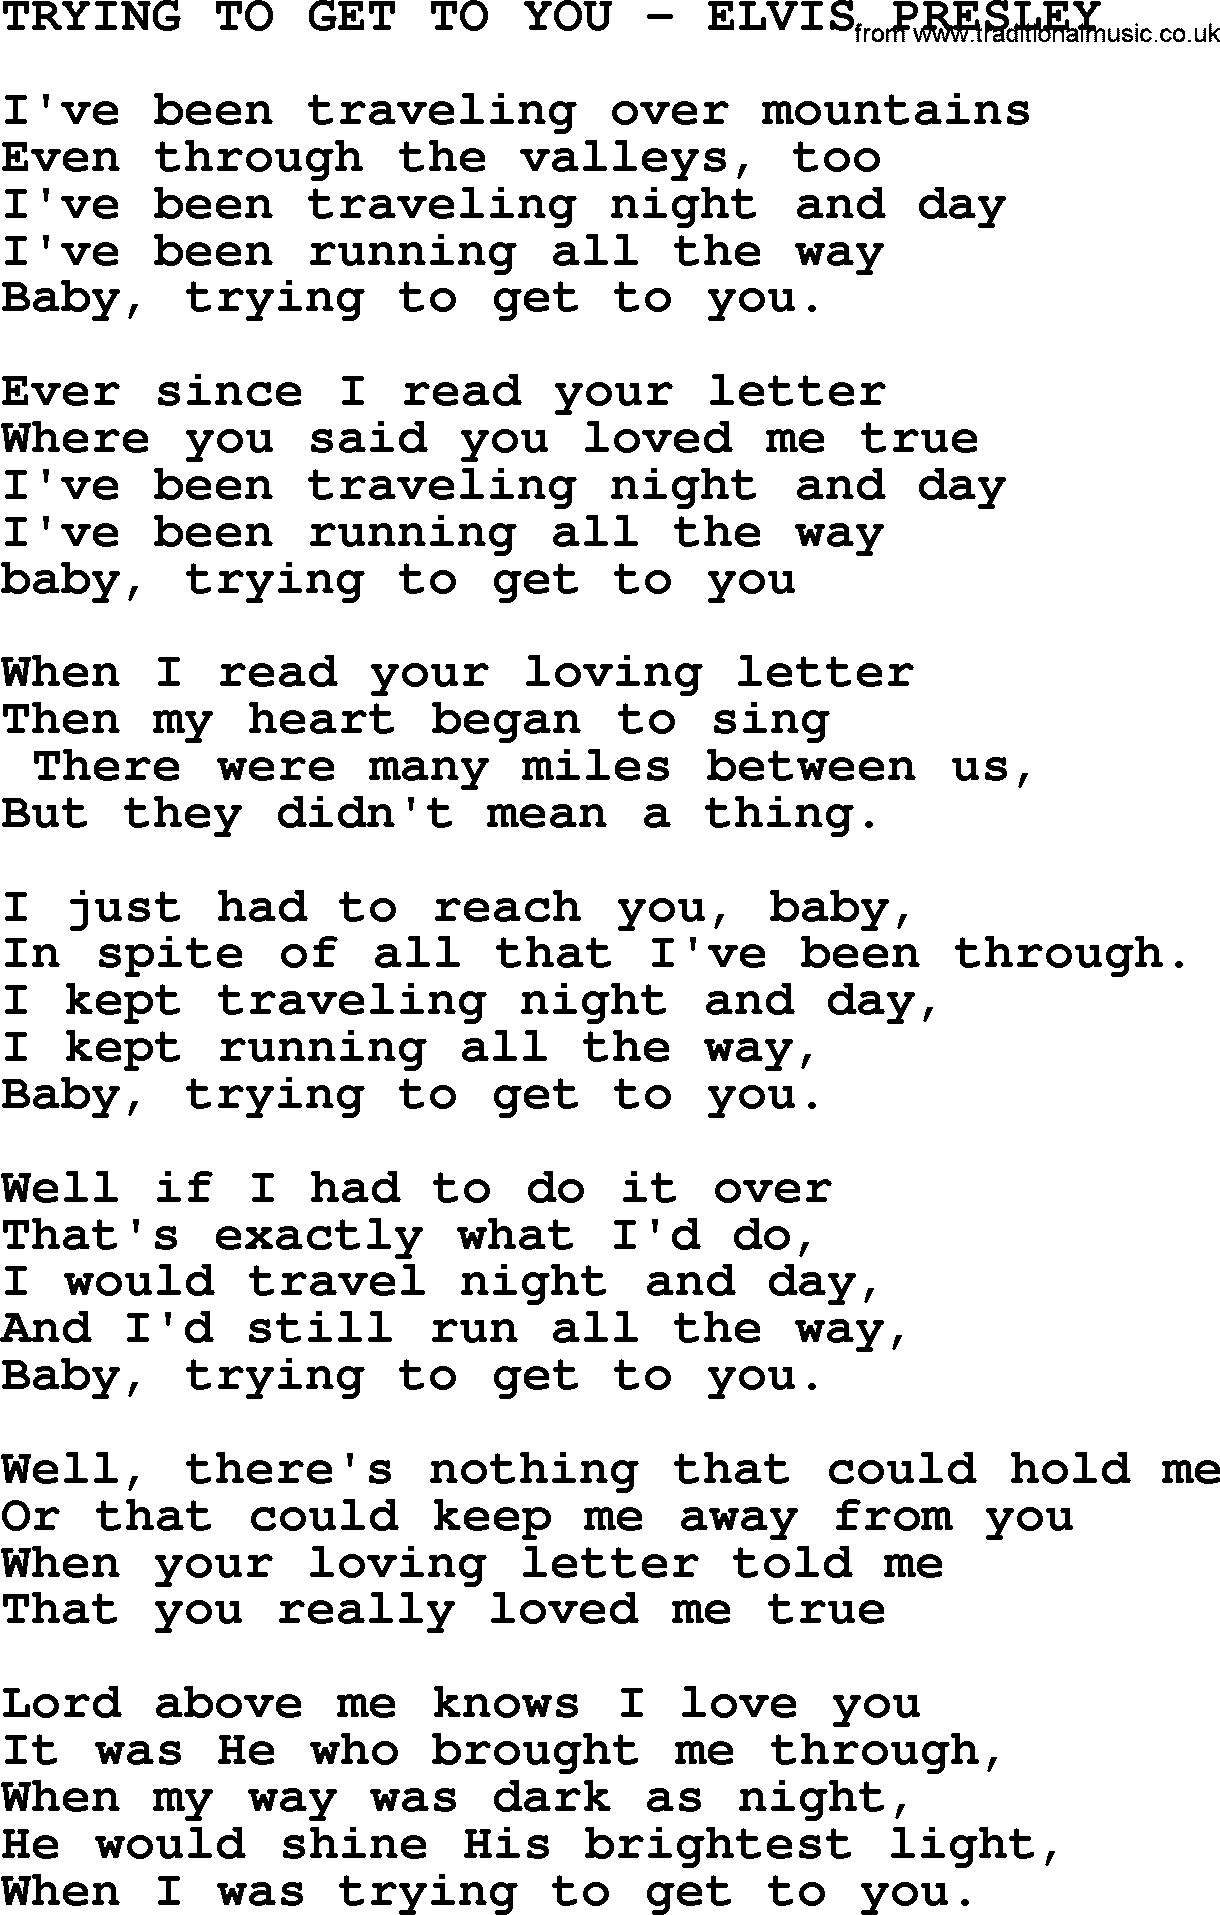 Elvis Presley song: Trying To Get To You-Elvis Presley-.txt lyrics and chords